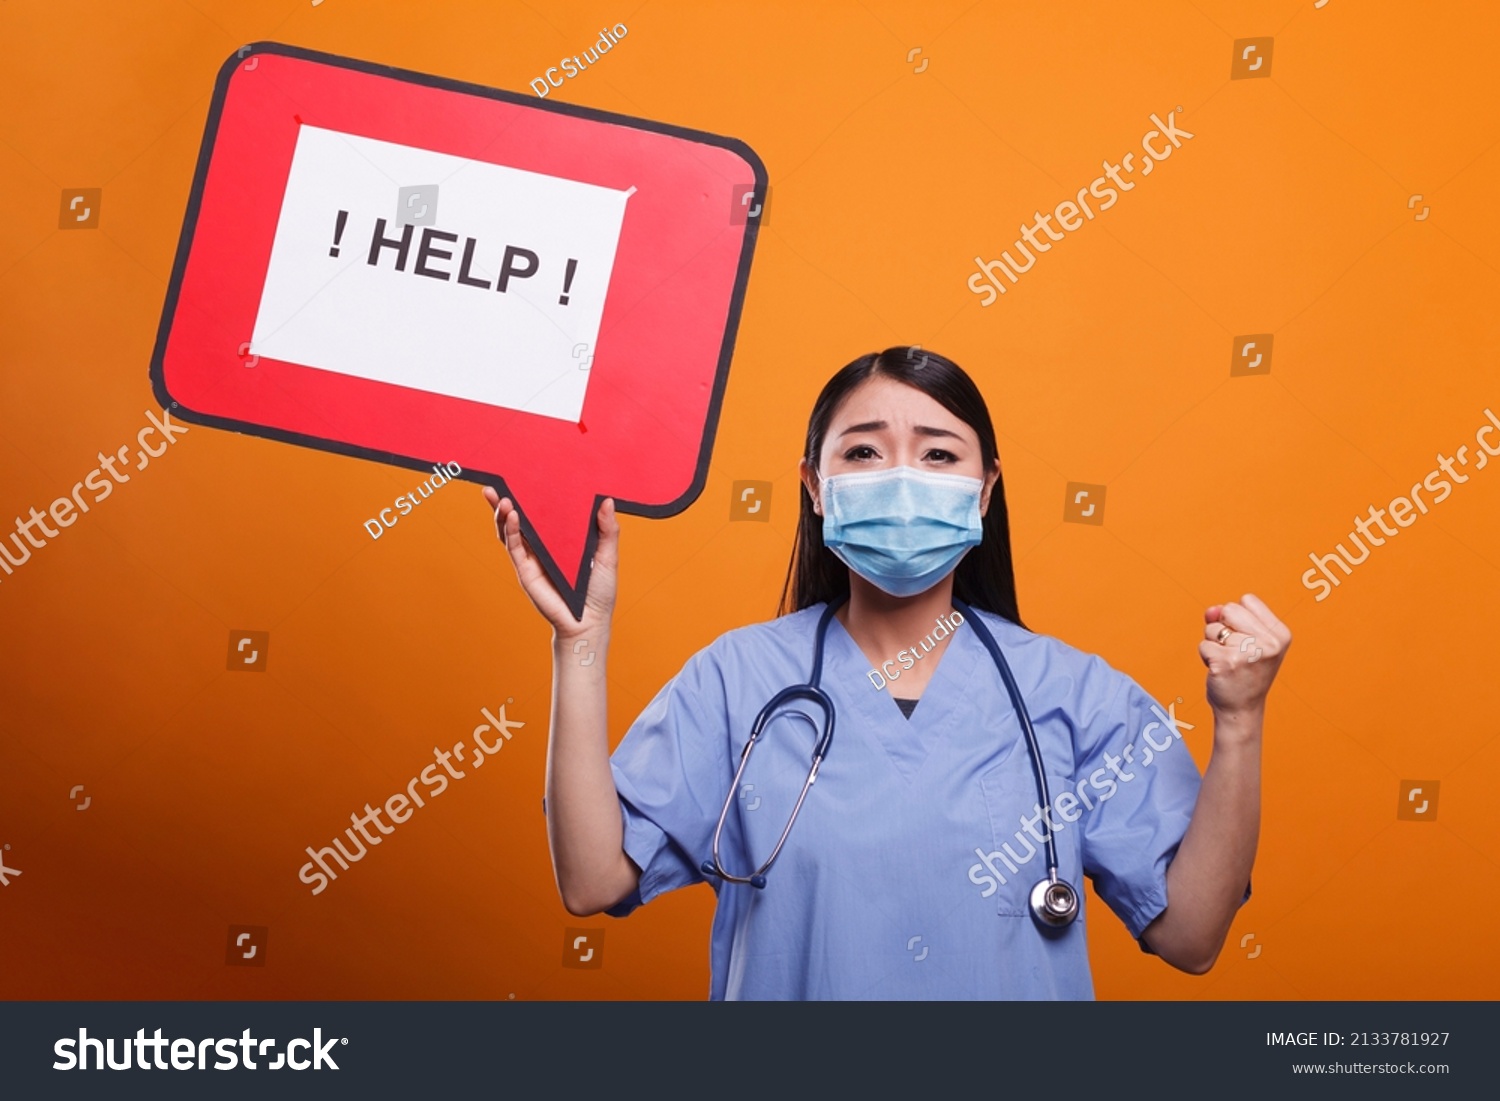 Young adult hospital nurse holding cardboard speech bubble sign while wearing stethoscope and virus protection facemask. Worried medical staff worker wearing medical instrument and asking for help. #2133781927